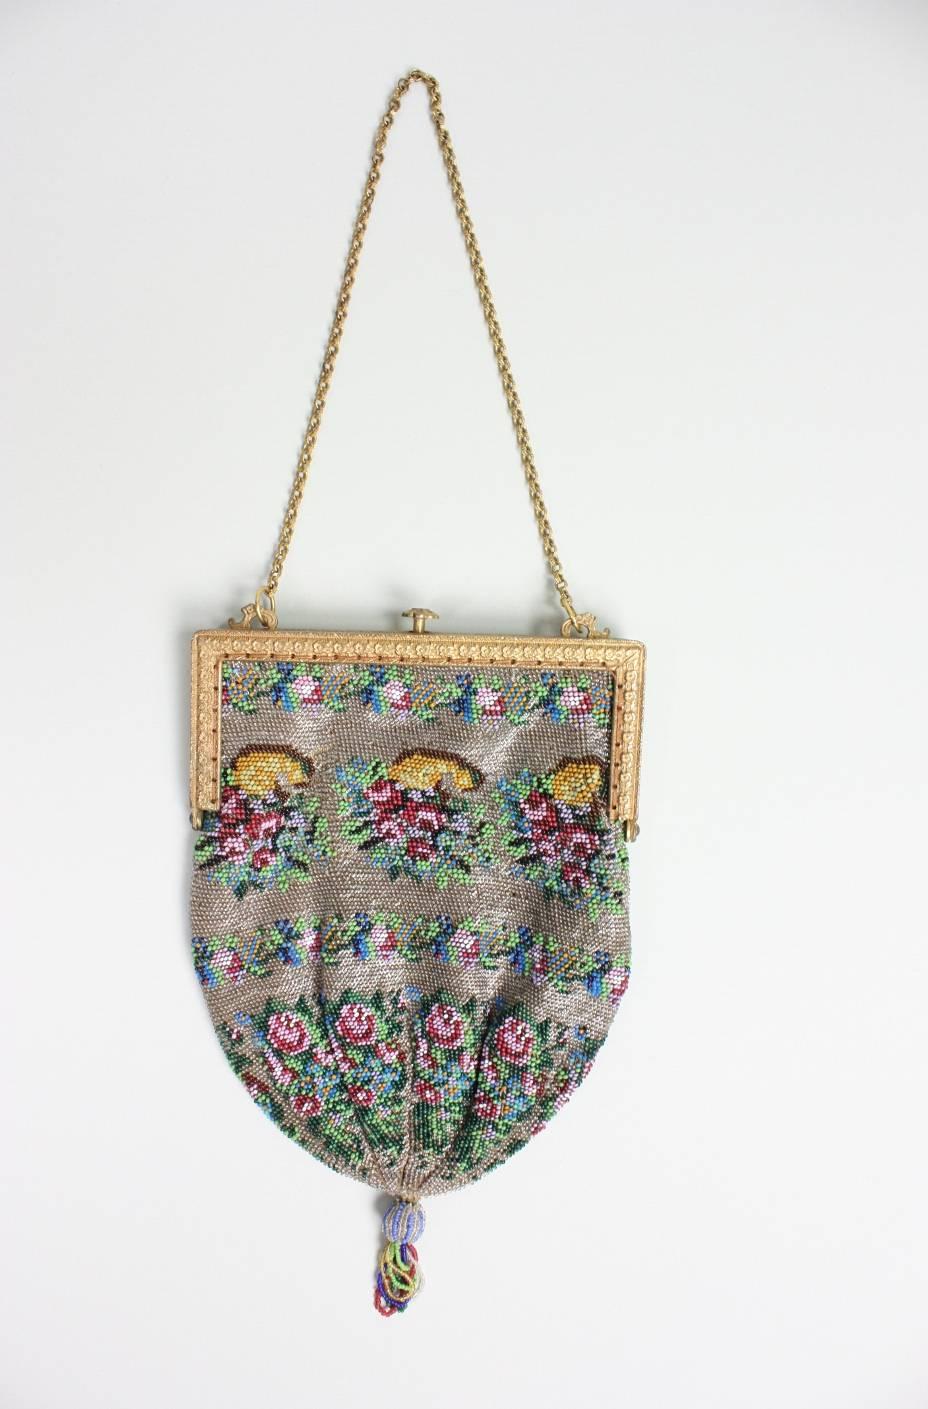 Vintage handbag dates to the 1920's and is comprised entirely of small seed beads.  Floral motif is worked in red, pink, and varied shades of blue.  Gold-toned frame is set with red and green rhinestones.  Push clasp.  Chain strap.  Red silk